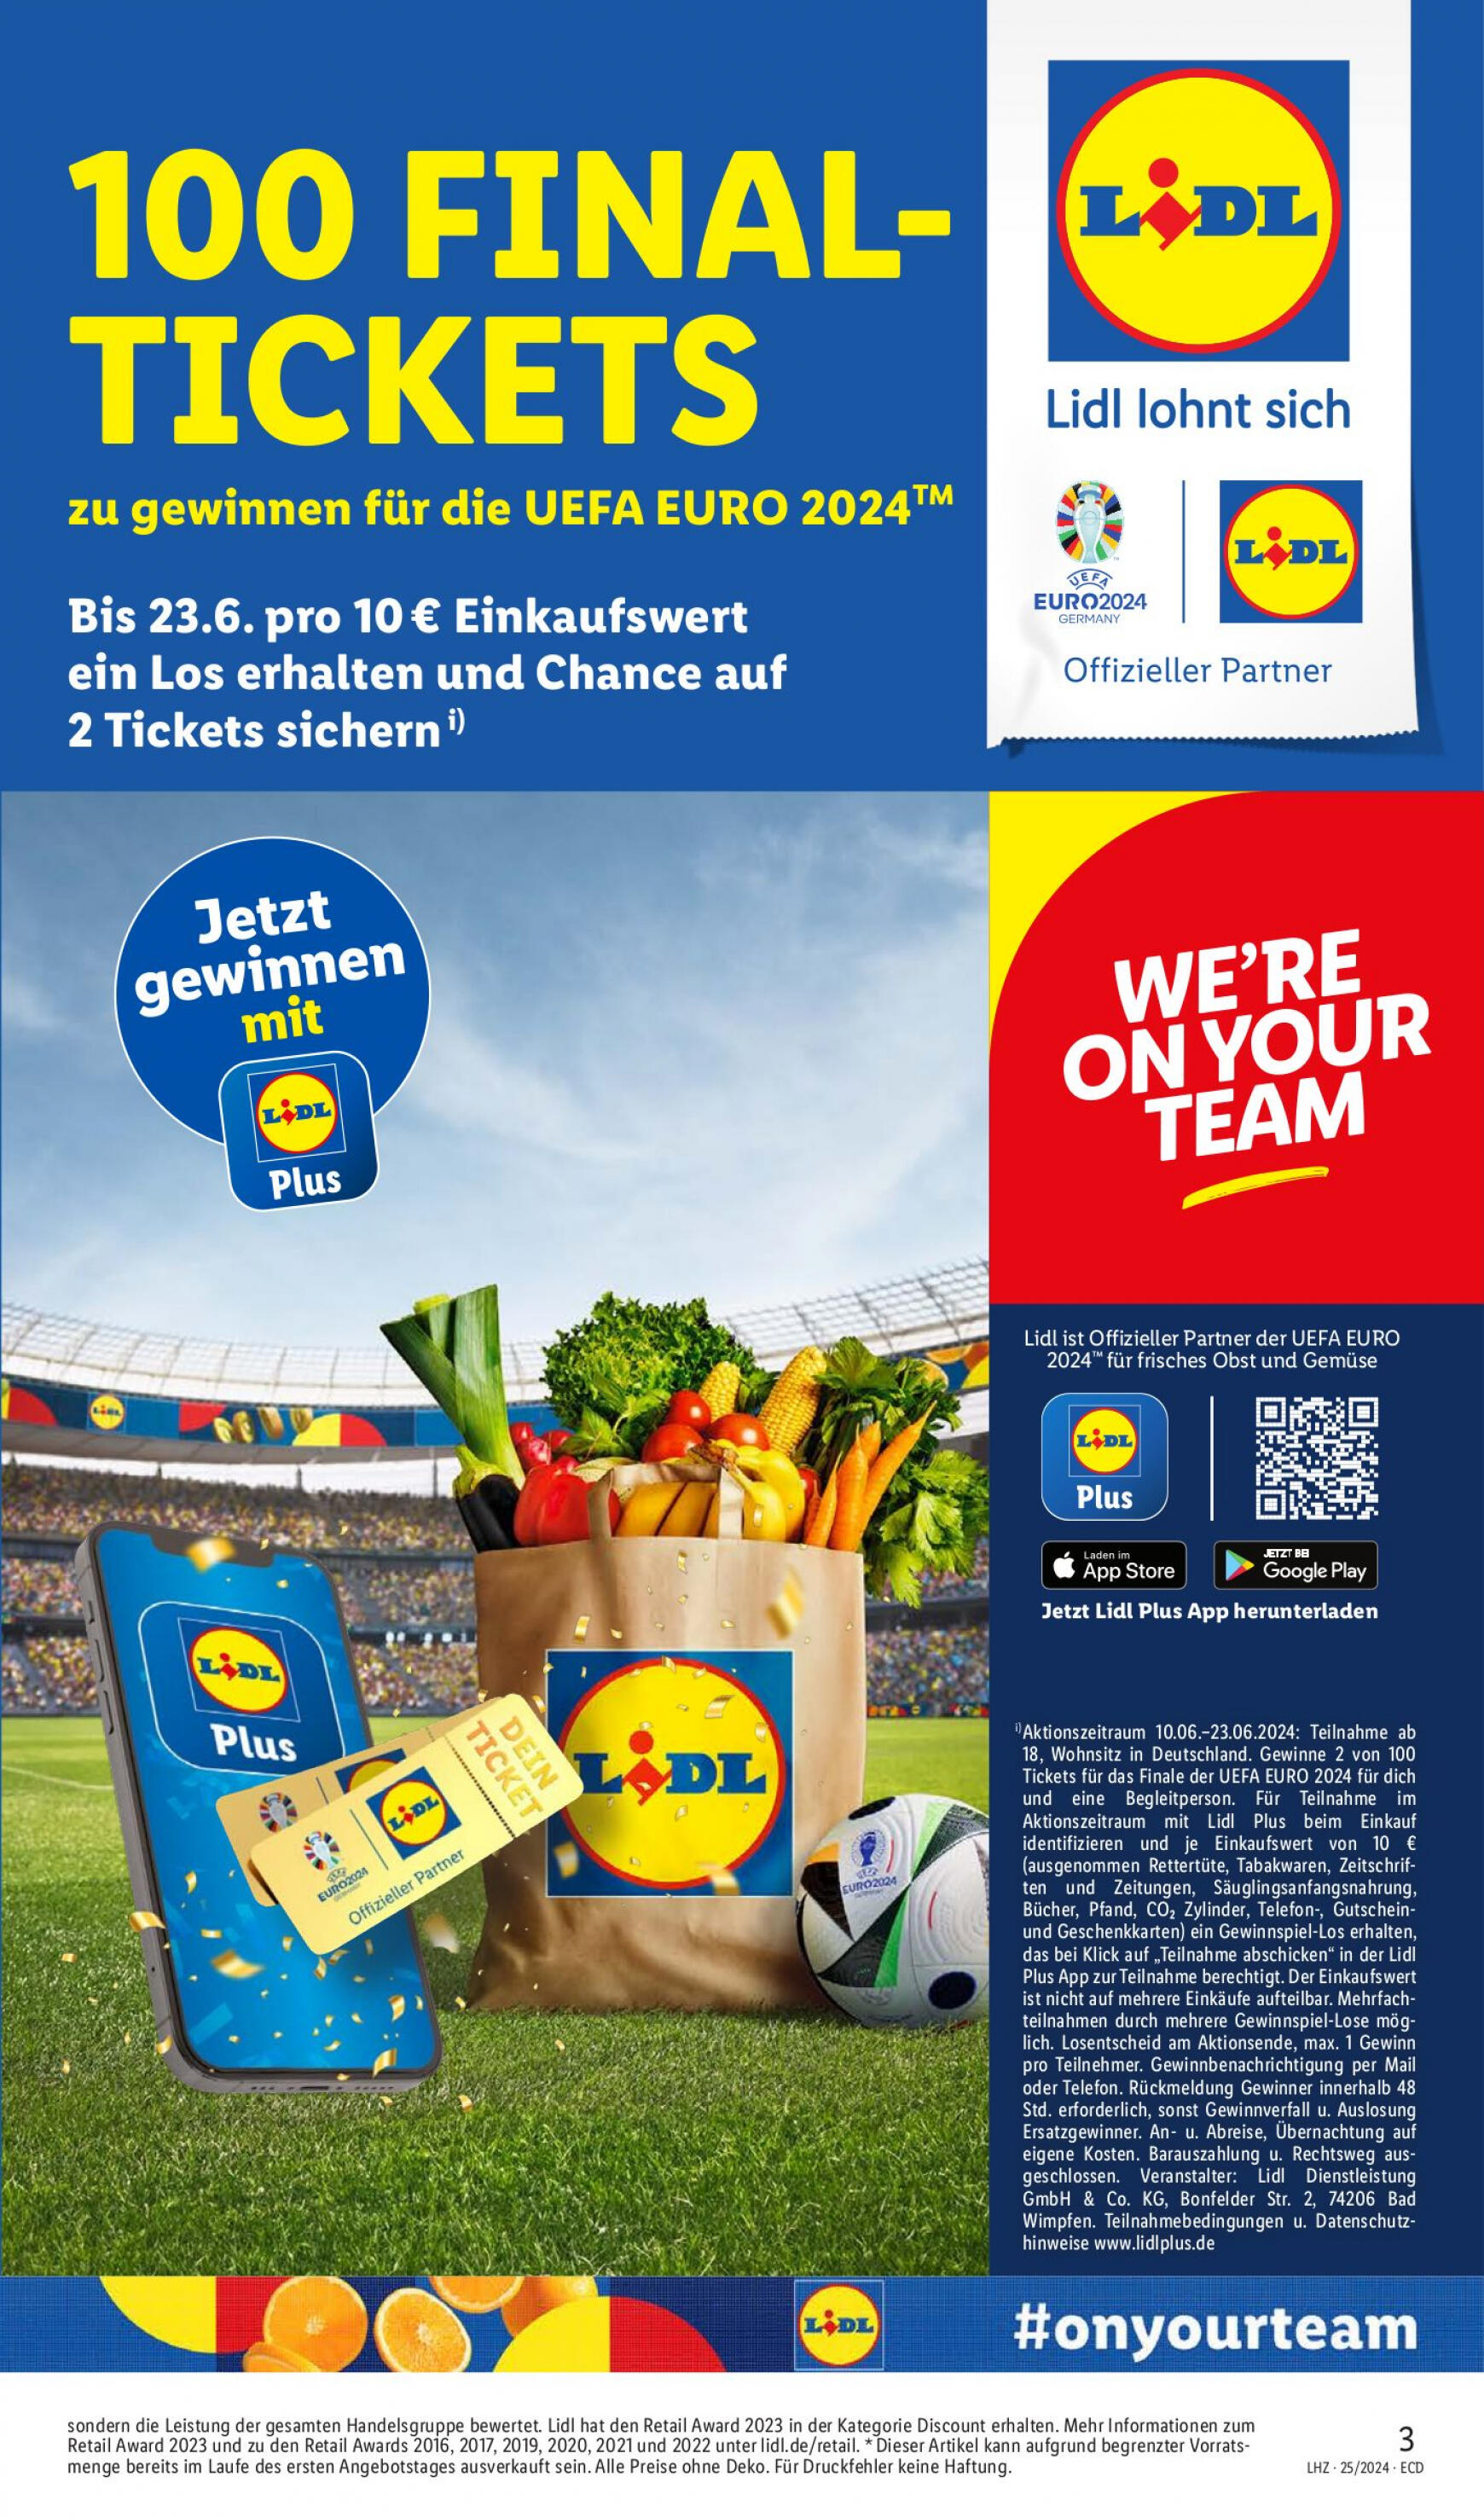 lidl - Flyer Lidl aktuell 17.06. - 22.06. - page: 3